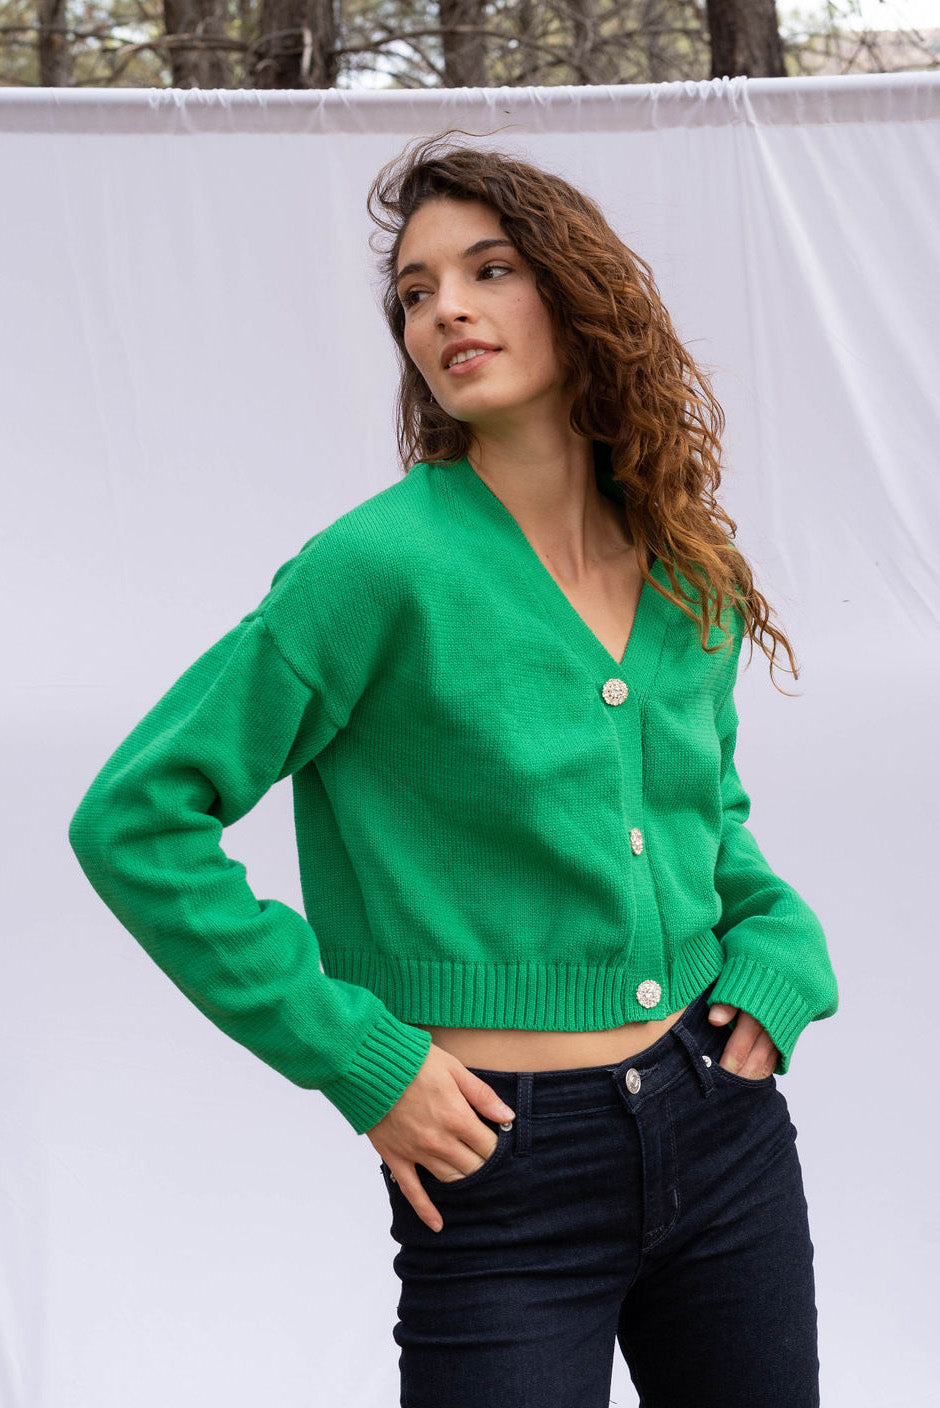 Diana cropped Cardigan in Emerald Green color for women by Paneros Clothing. Handknitted from sustainable deadstock cotton yarn, with full sleeves and vintage crystal buttons. Front view.